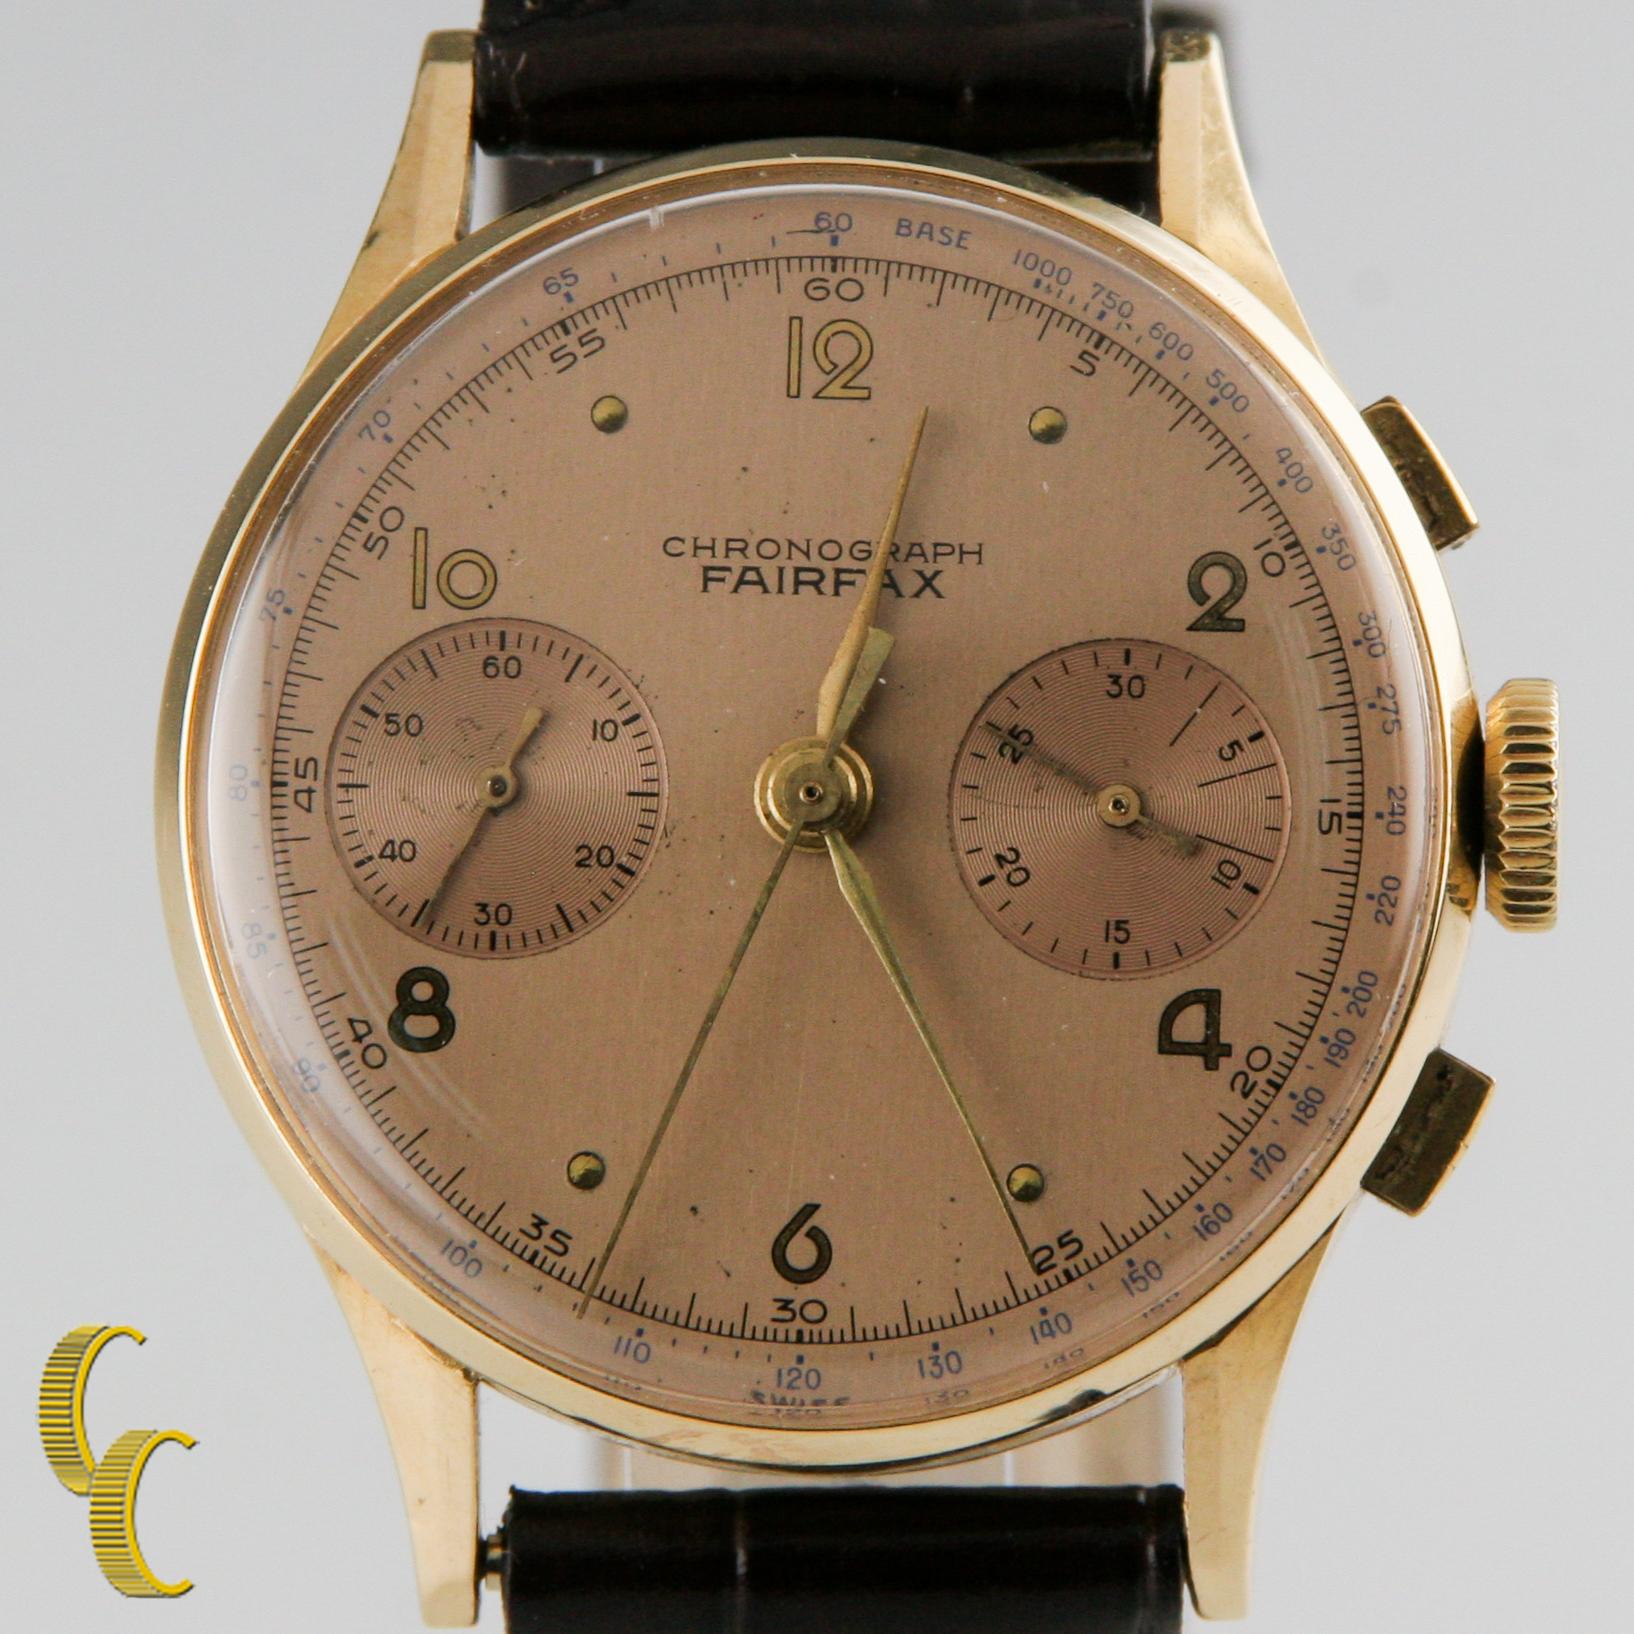 Vintage Men's Chronograph Fairfax 18K Yellow Gold Case w/Sub Dials & Tachymeter

Movement # 1414

Round 18k Yellow Gold Case
Width=33mm  (35 mm w/ Crown)
Lug-to-Lug Distance= 41 mm
Thickness = 7 mm

Light Rose Colored Dial w/Gold H + M + S